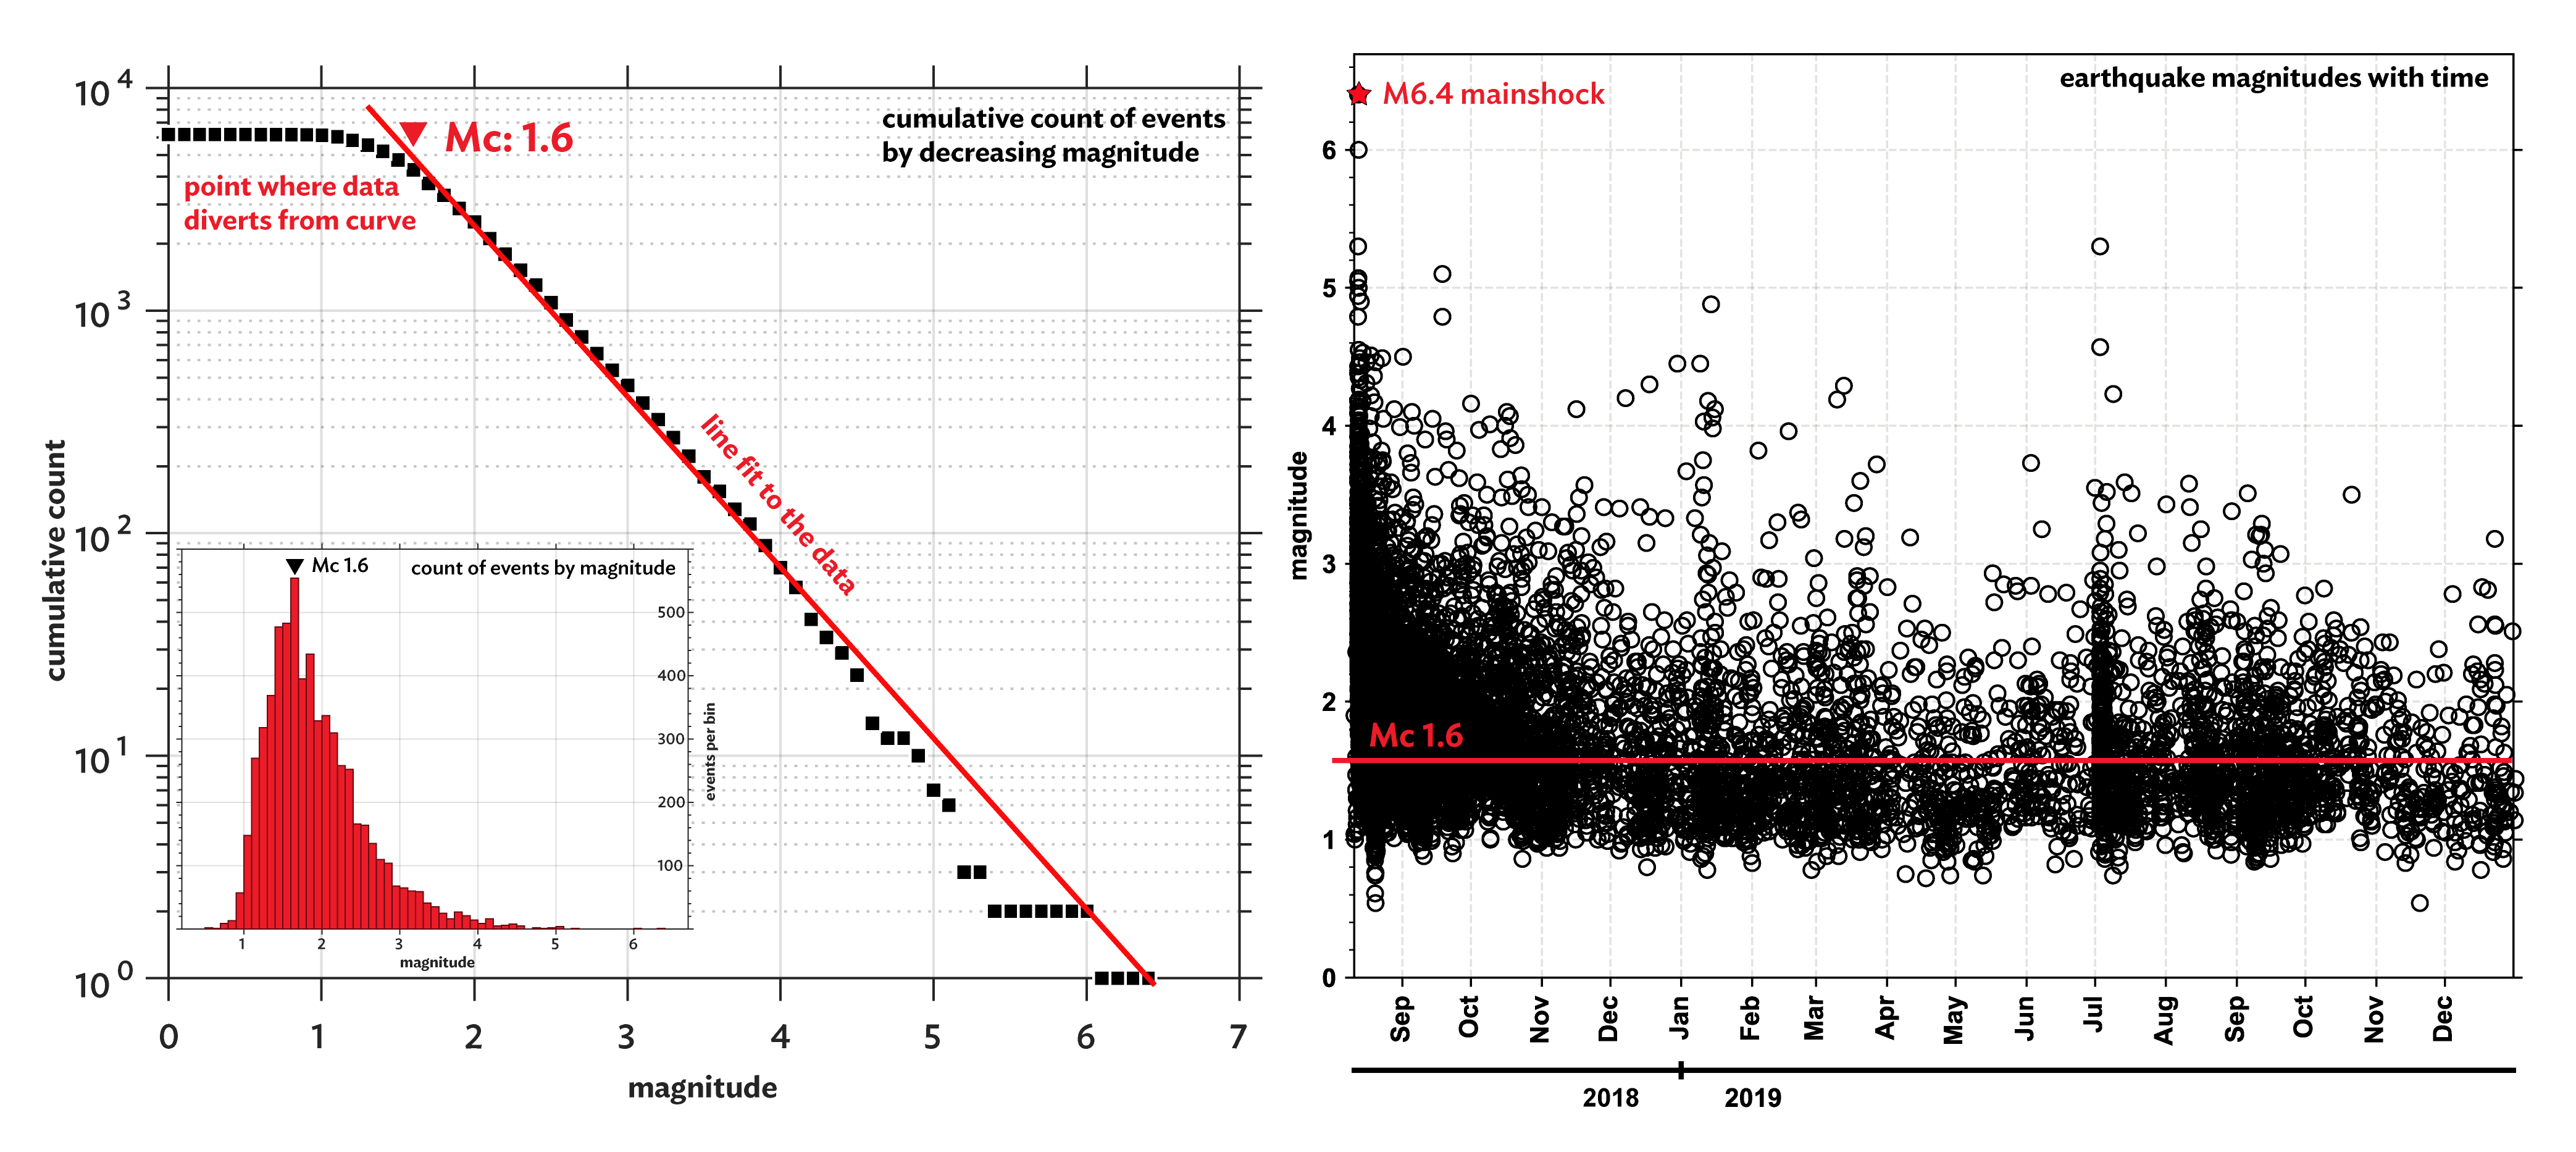 left) Estimation of magnitude of completeness for a M6.4 event and its aftershock sequence. (right) Plot of magnitudes with time for the same dataset, showing the calculated magnitude of completeness from the graph on the left.